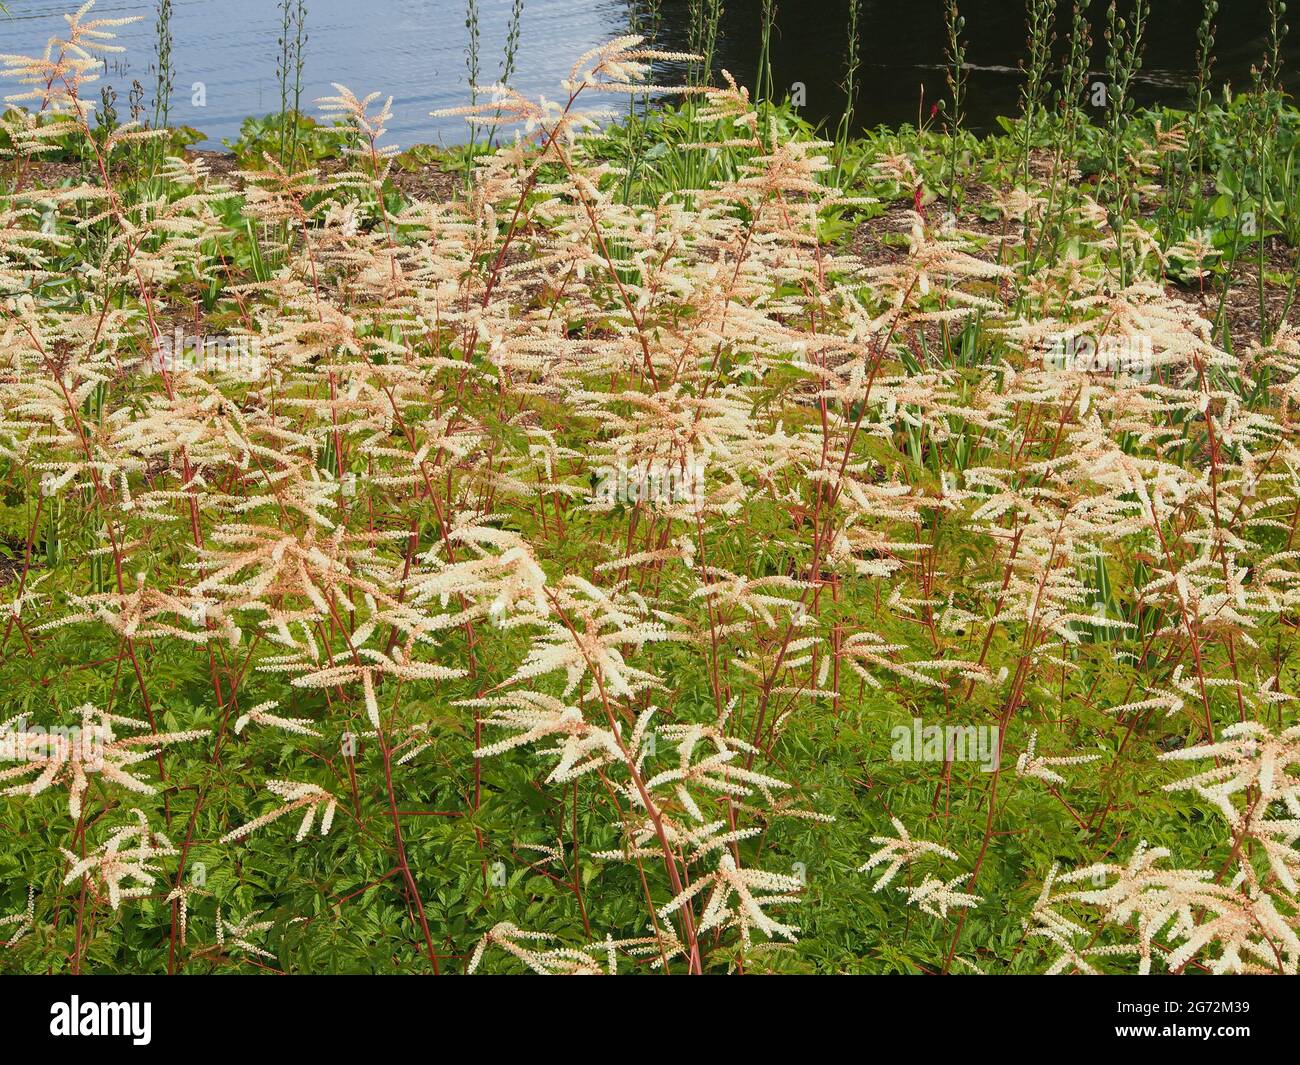 Clump of white astilbe flowers growing at RHS Bridgewater, Salford, Manchester, UK, in July. Stock Photo